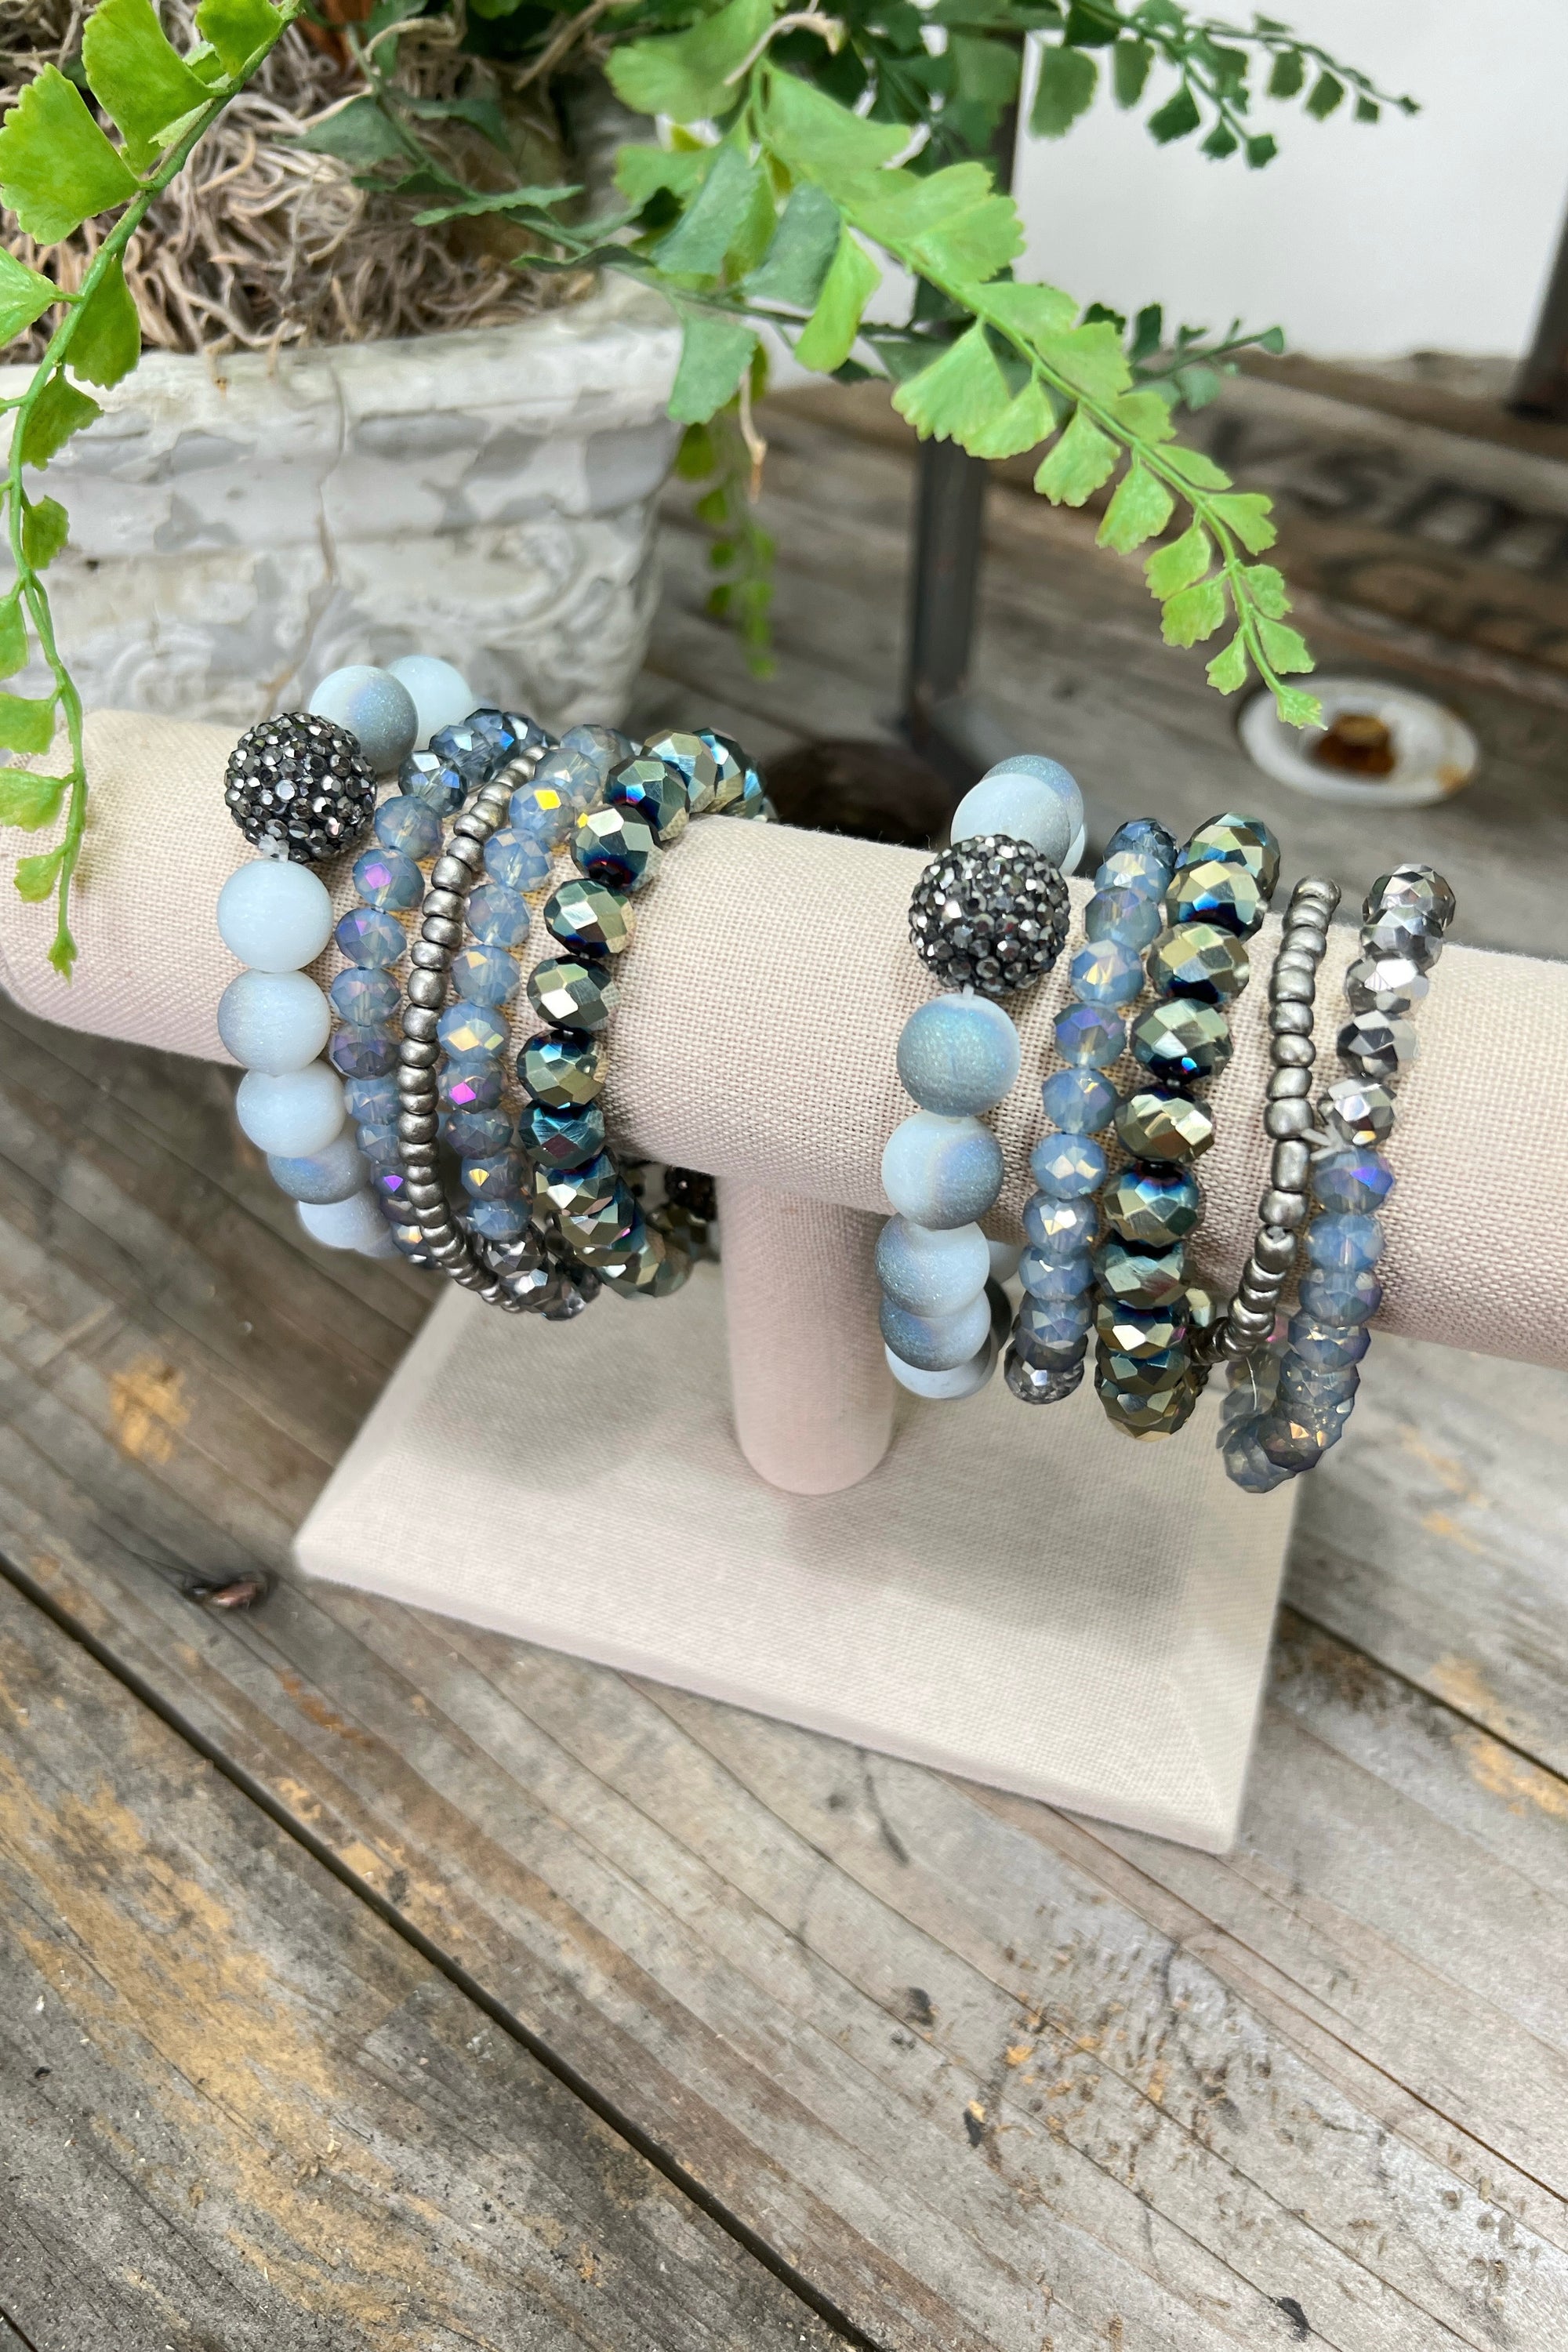 HELP] Wanting to make nice bracelets for gifts, tips on finding decent  materials? : r/jewelrymaking